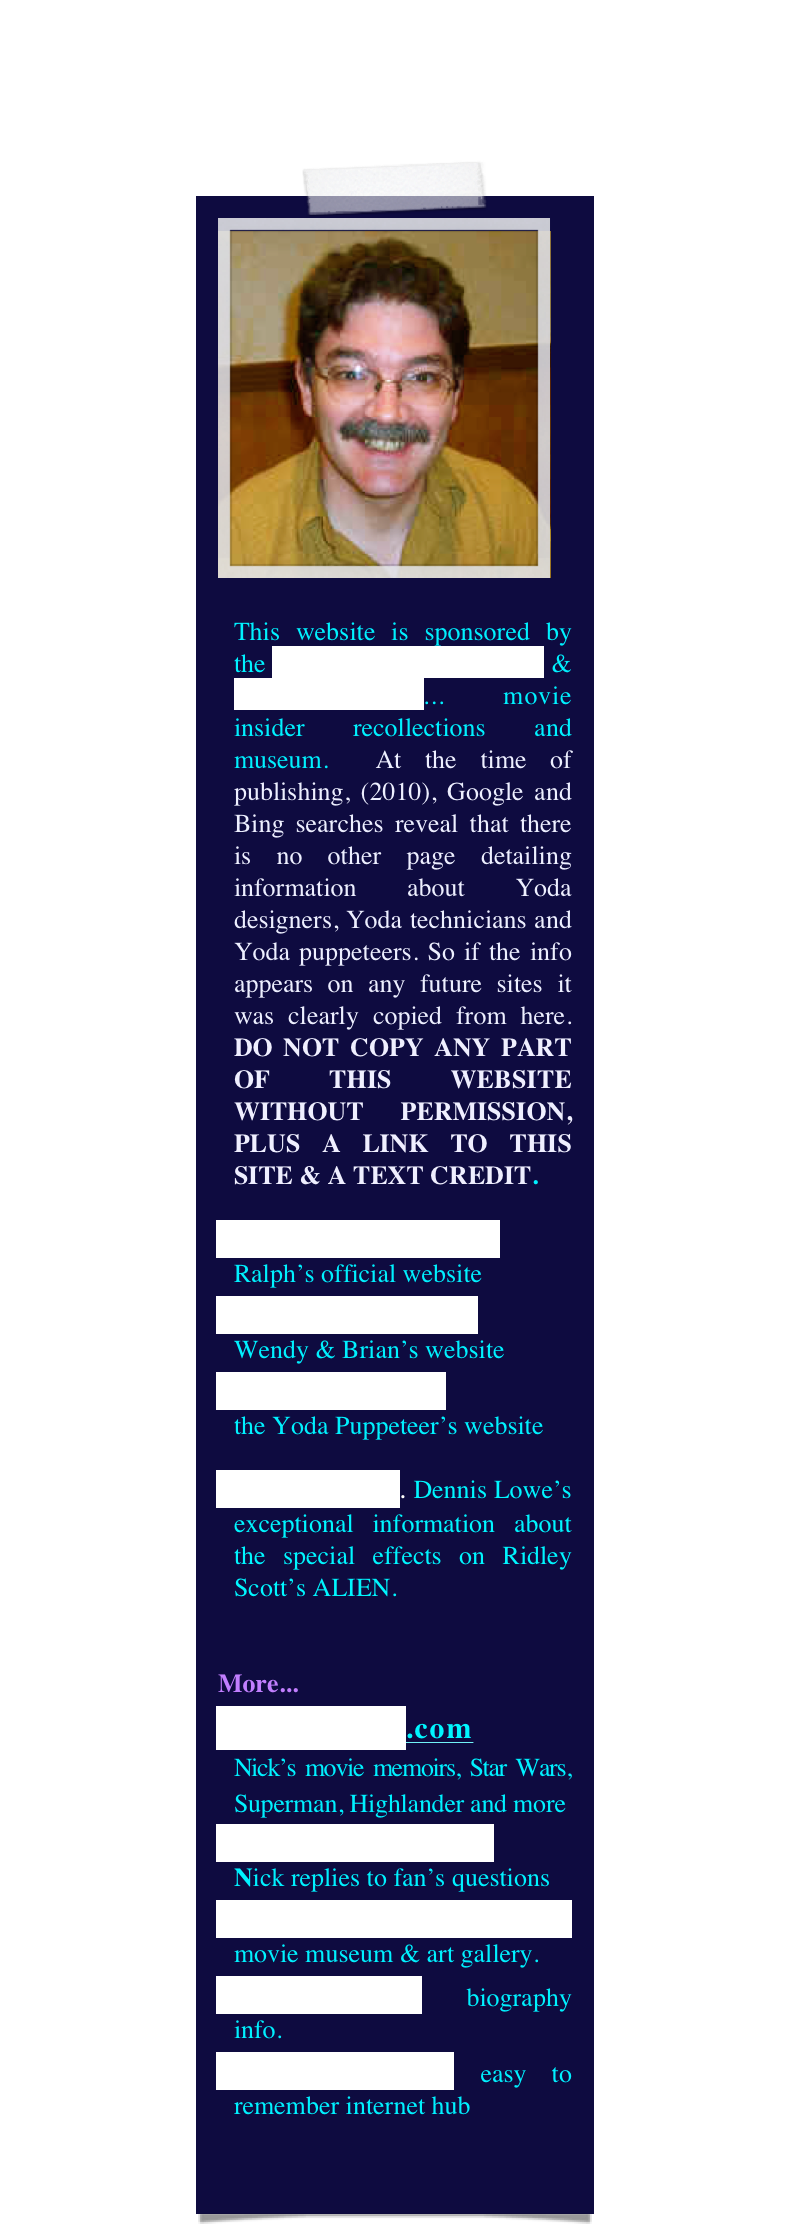 ￼

This website is sponsored by the Yoda Guy Movie Exhibit & CineSecrets.com... movie insider recollections and museum.  At the time of publishing, (2010), Google and Bing searches reveal that there is no other page detailing information about Yoda designers, Yoda technicians and Yoda puppeteers. So if the info appears on any future sites it was clearly copied from here. DO NOT COPY ANY PART OF THIS WEBSITE WITHOUT PERMISSION, PLUS A LINK TO THIS SITE & A TEXT CREDIT.
RalphMcQuarrie.com
Ralph’s official website
The World of Froud
Wendy & Brian’s website
DaveBarclay.com 
the Yoda Puppeteer’s website
Alien Makers. Dennis Lowe’s exceptional information about the special effects on Ridley Scott’s ALIEN.


More...
CineSecrets.com 
Nick’s movie memoirs, Star Wars, Superman, Highlander and more
Questions & Answers   
Nick replies to fan’s questions
YodaGuyMovieExhibit movie museum & art gallery.
NickMaley.com biography info.
thatYodaGuy.com easy to remember internet hub

